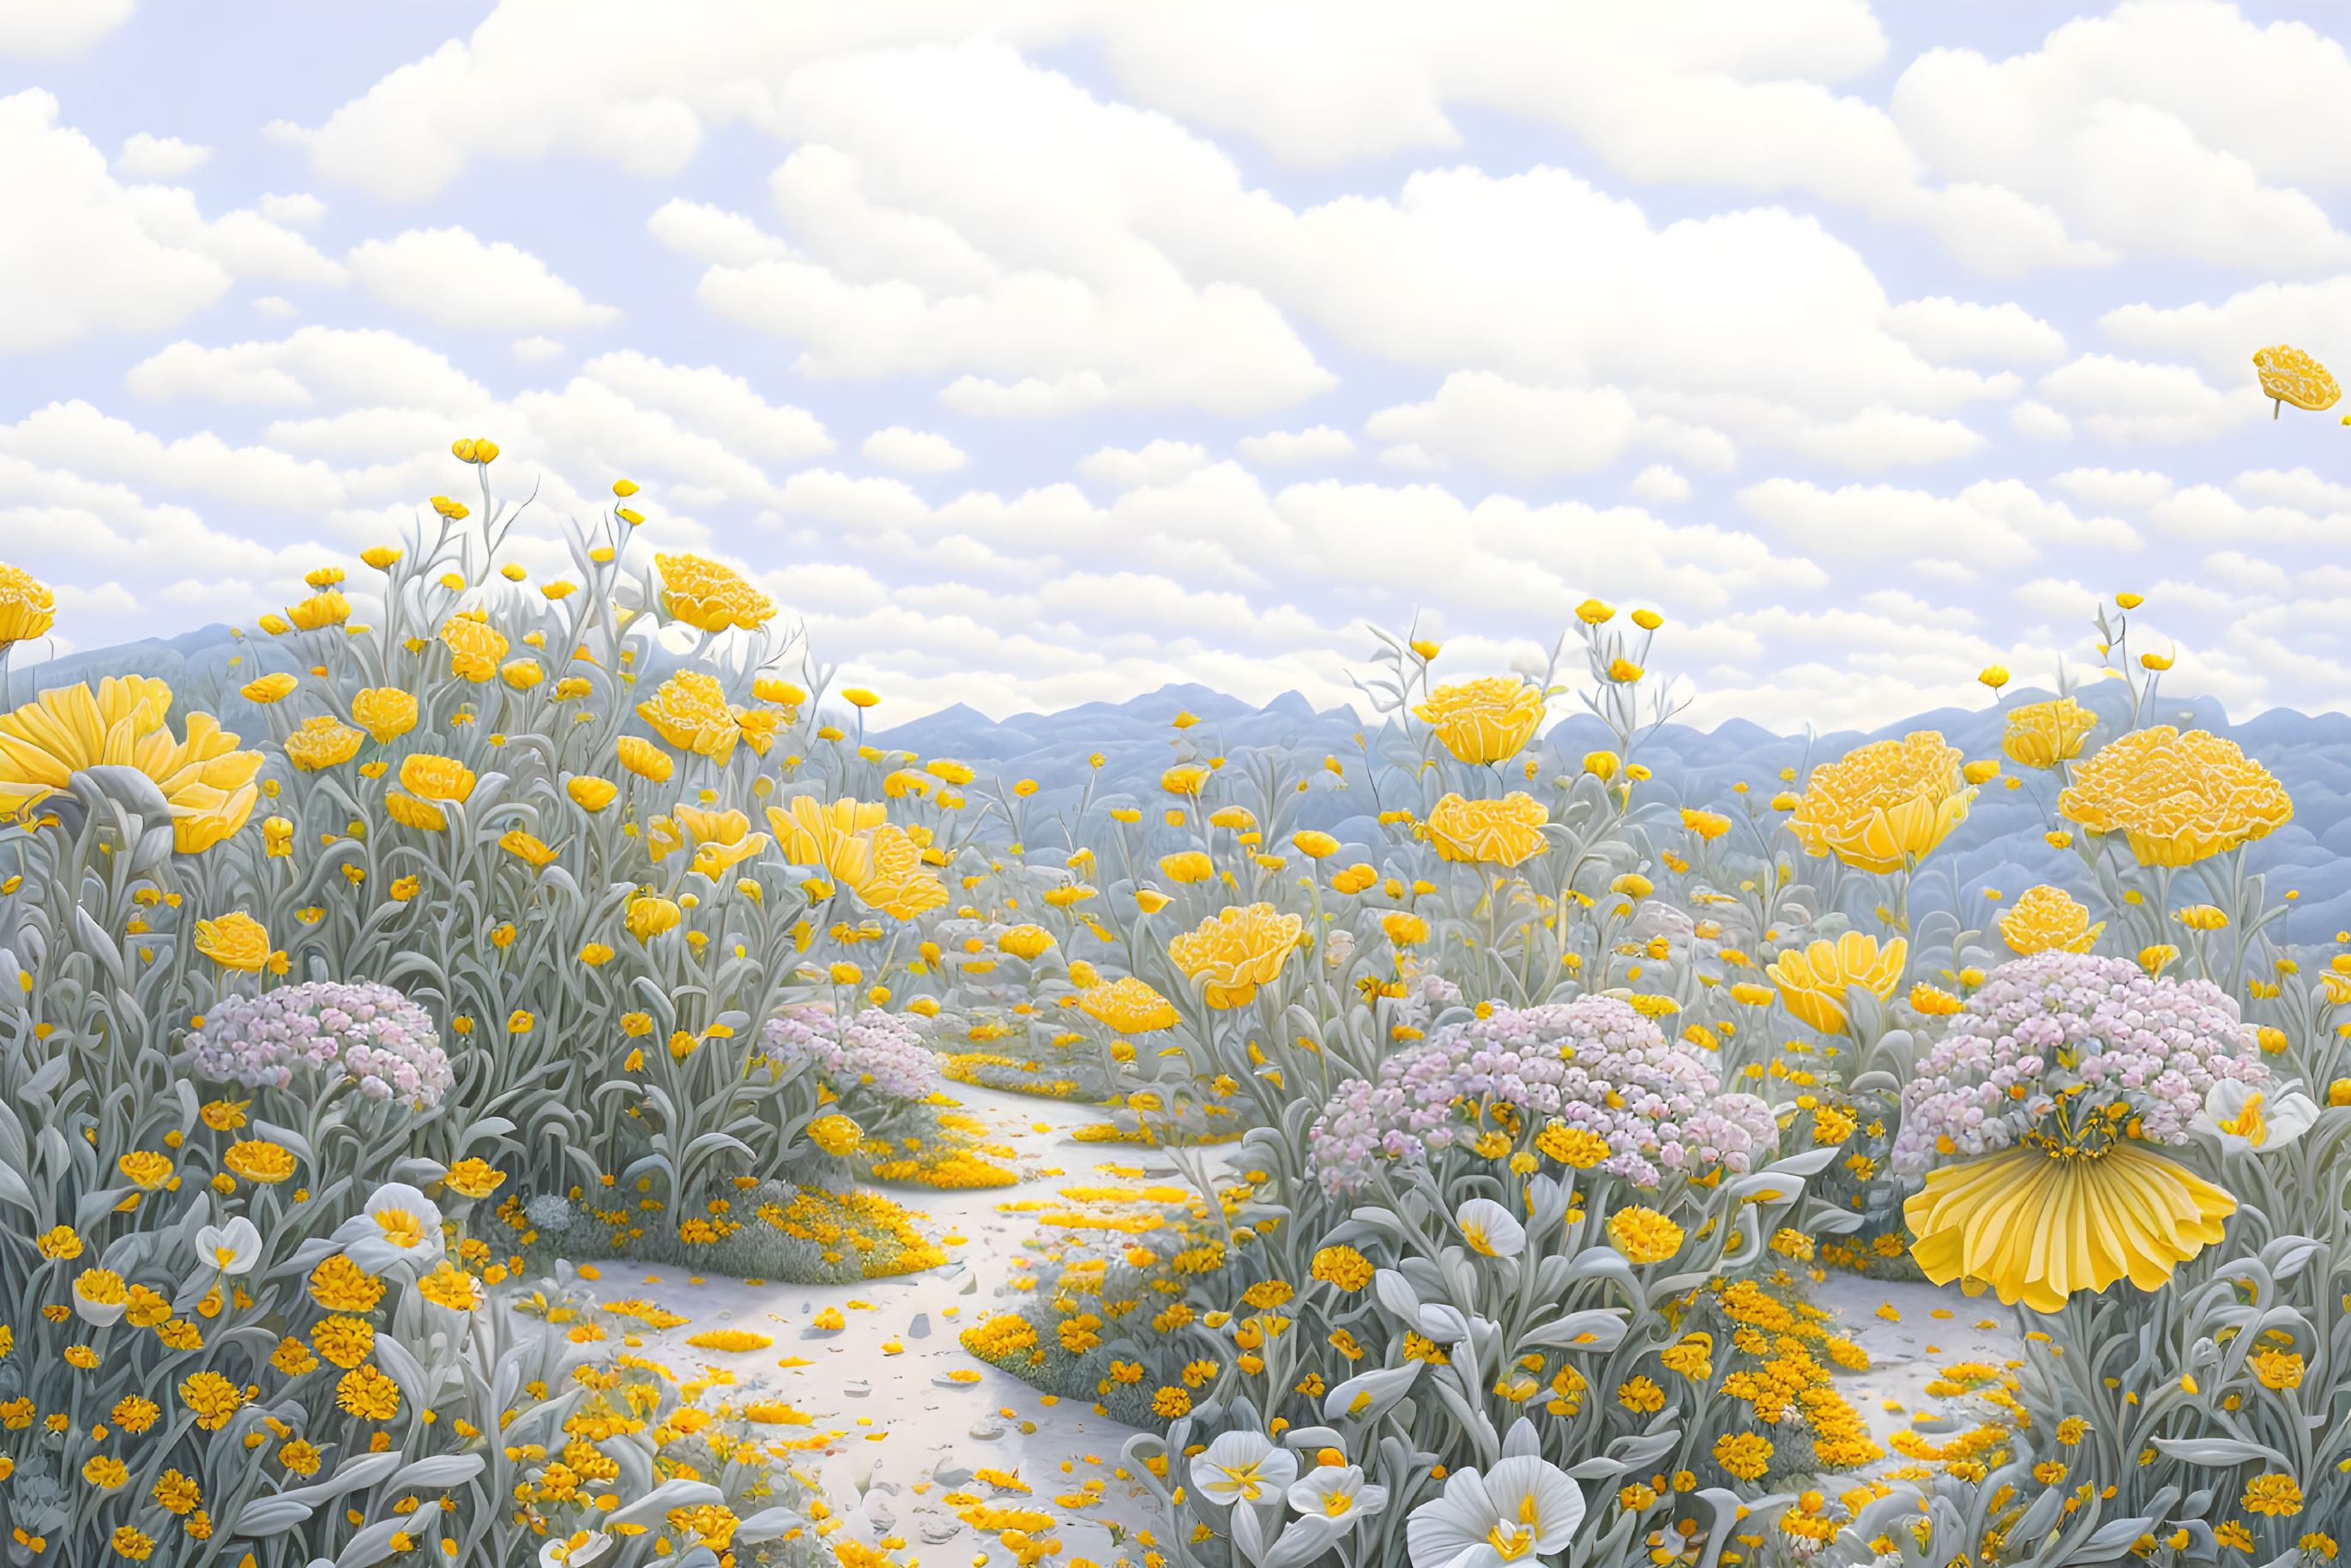 Colorful flower field illustration with mountains and cloudy sky